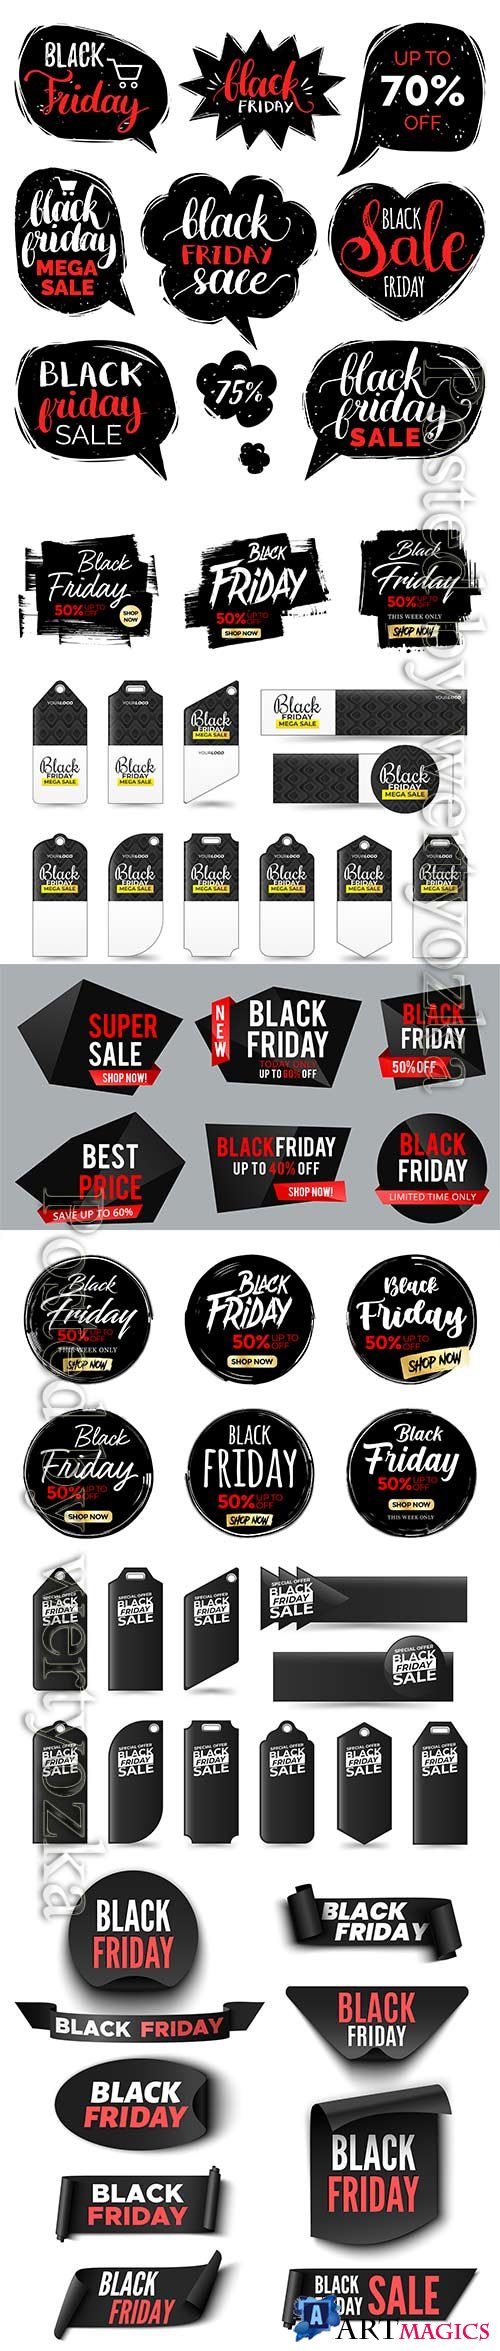 Set of black friday sale banners, ribbons and stickers